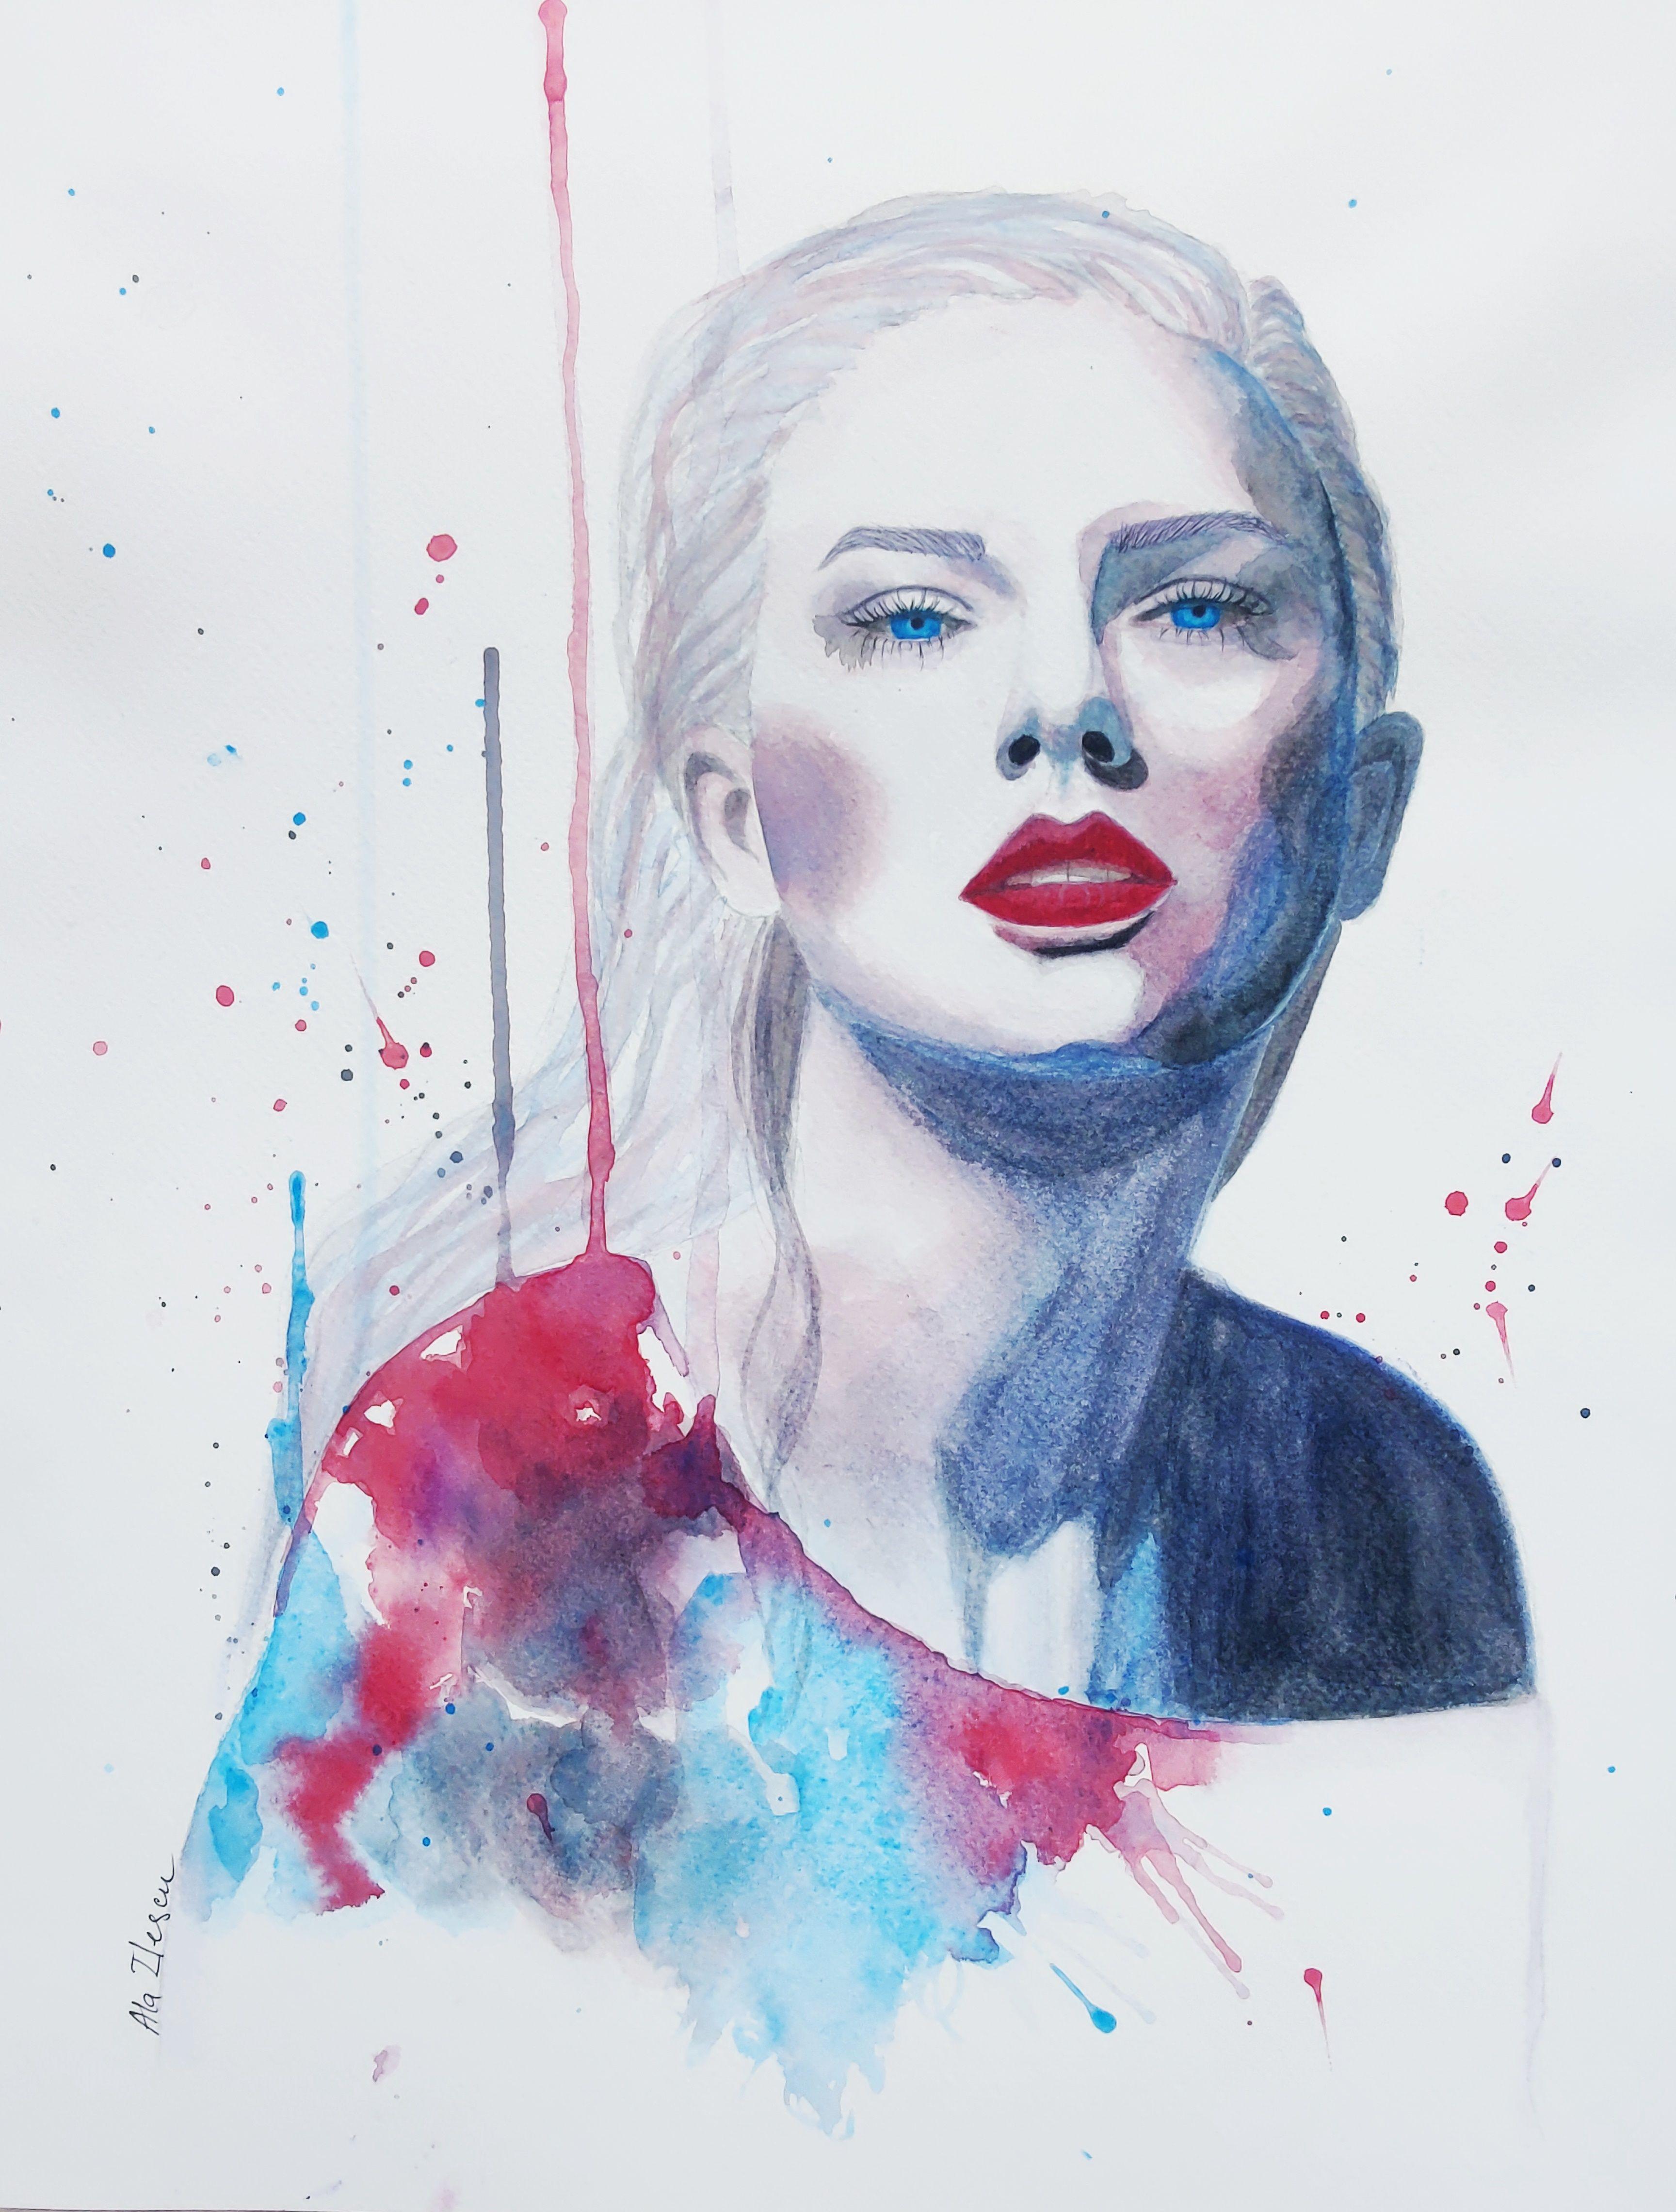 I did something bad, Painting, Watercolor on Watercolor Paper - Art by Ala Ilescu